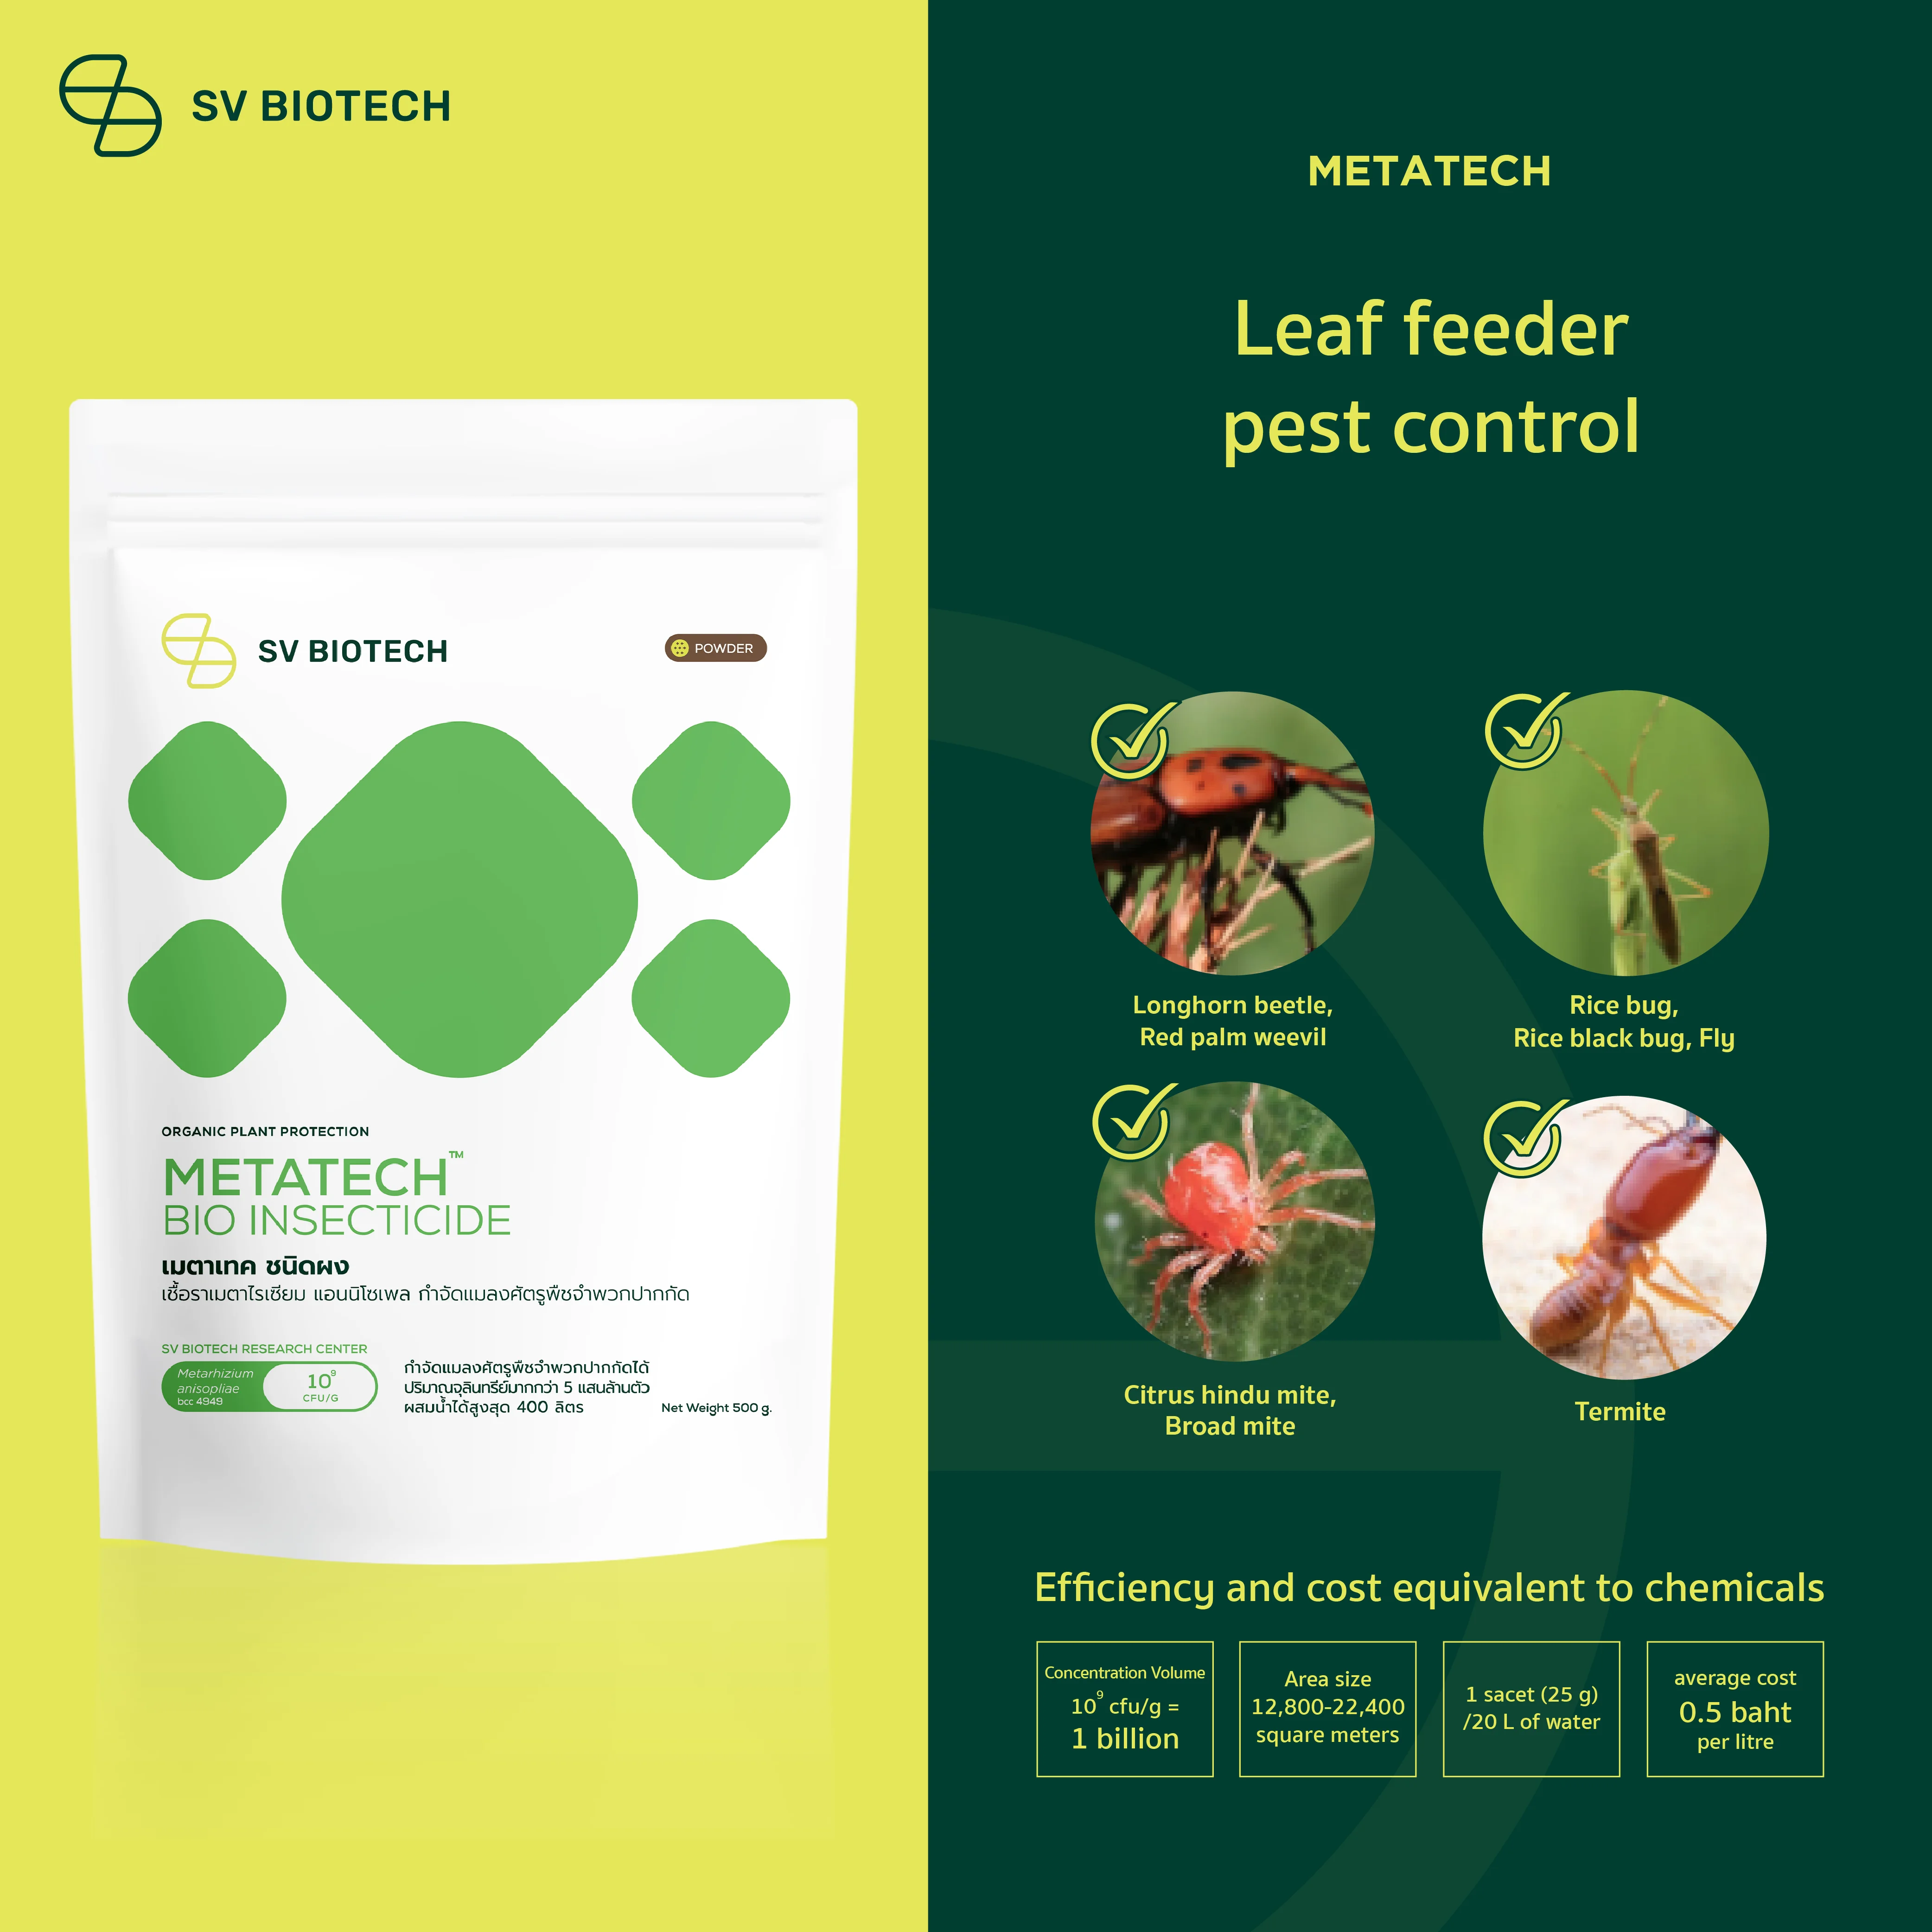 Beauveria Bio Insecticide Metarhizium Plant Protection Superbeautech Anisopliae Metatech By SV Biotech Plant Protection